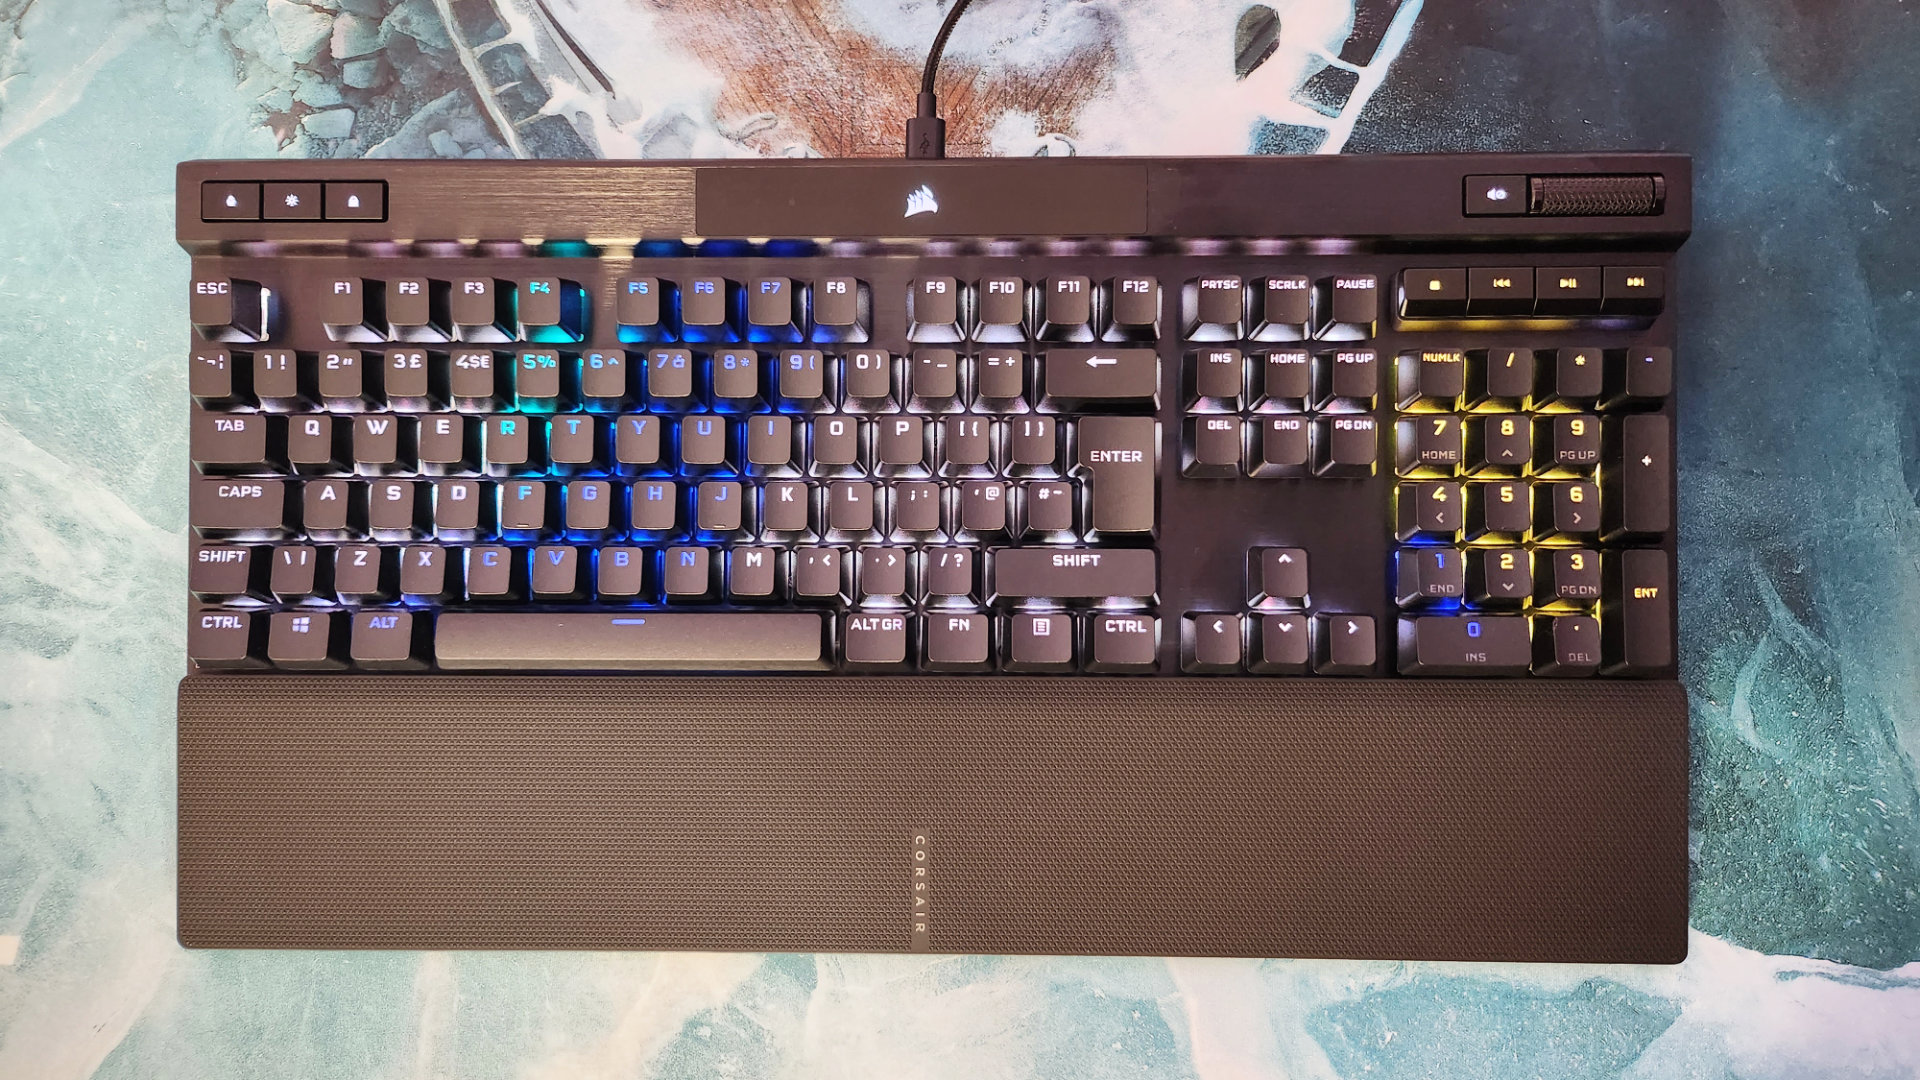 Corsair K70 RGB Pro review: Worth every penny - Reviewed